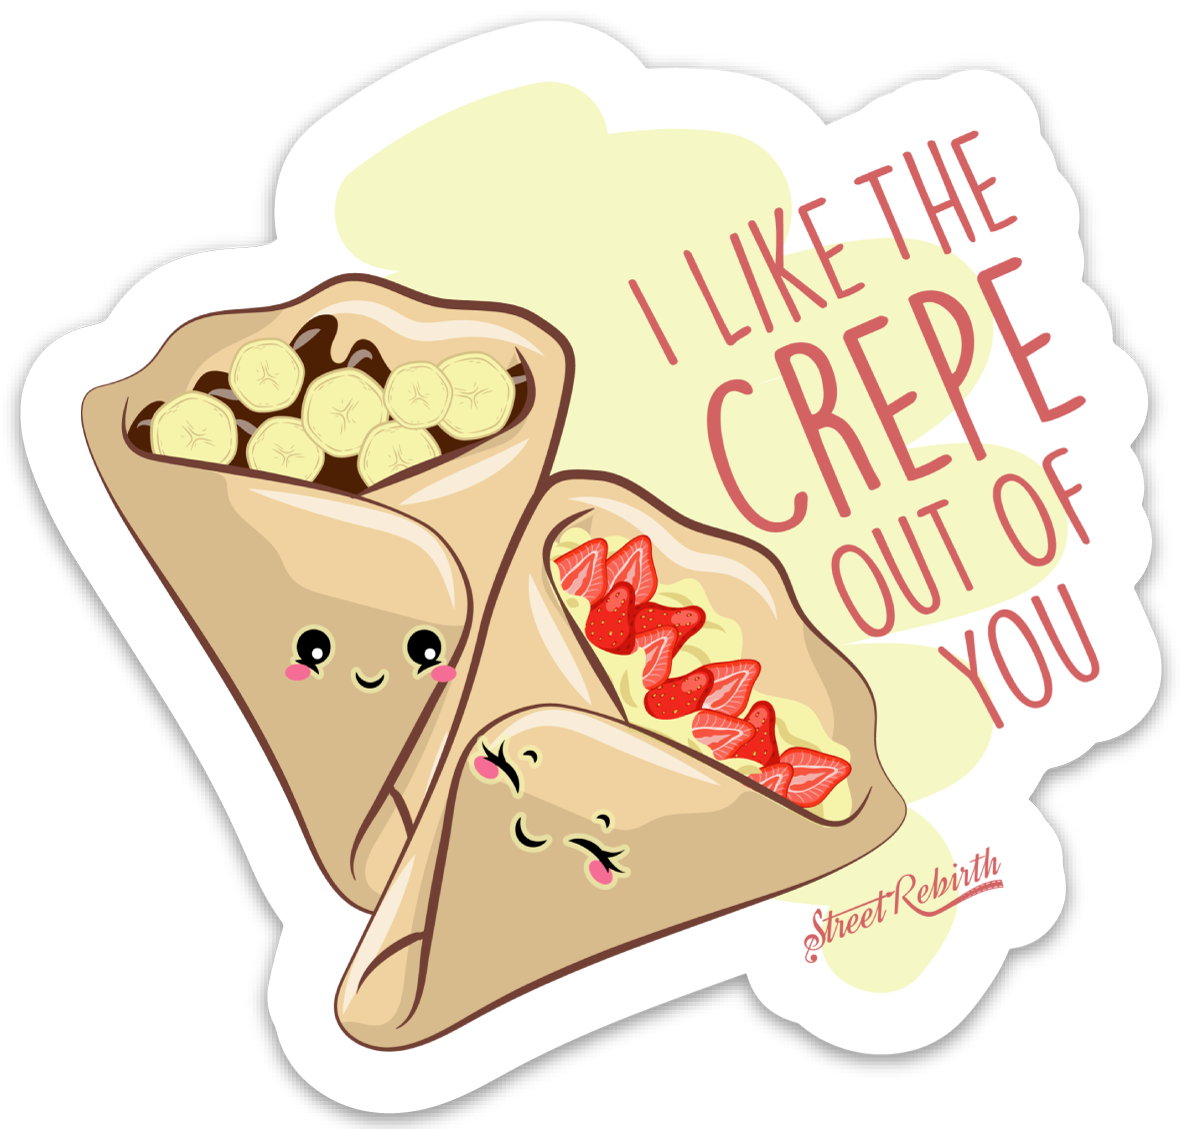 I LIKE THE CREPE OUT OF YOU PUN STICKER – ONE 4 INCH WATER PROOF VINYL STICKER – FOR HYDRO FLASK, SKATEBOARD, LAPTOP, PLANNER, CAR, COLLECTING, GIFTING